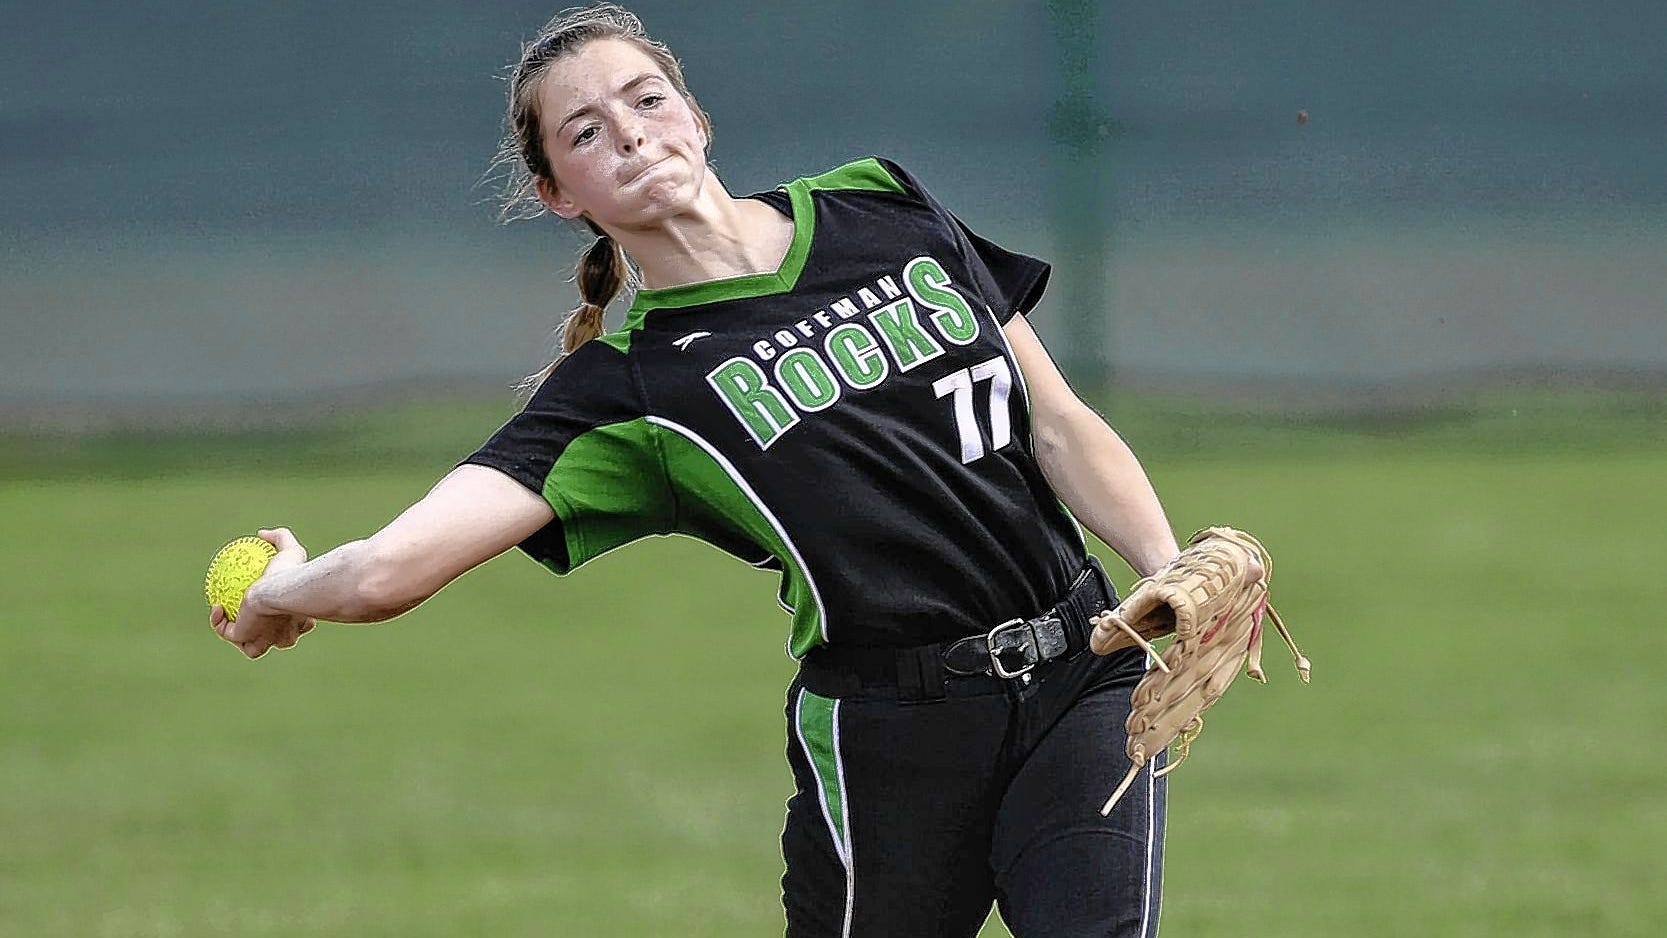 Softball Dublin Coffman graduate Rylee Anspach excited to return to field